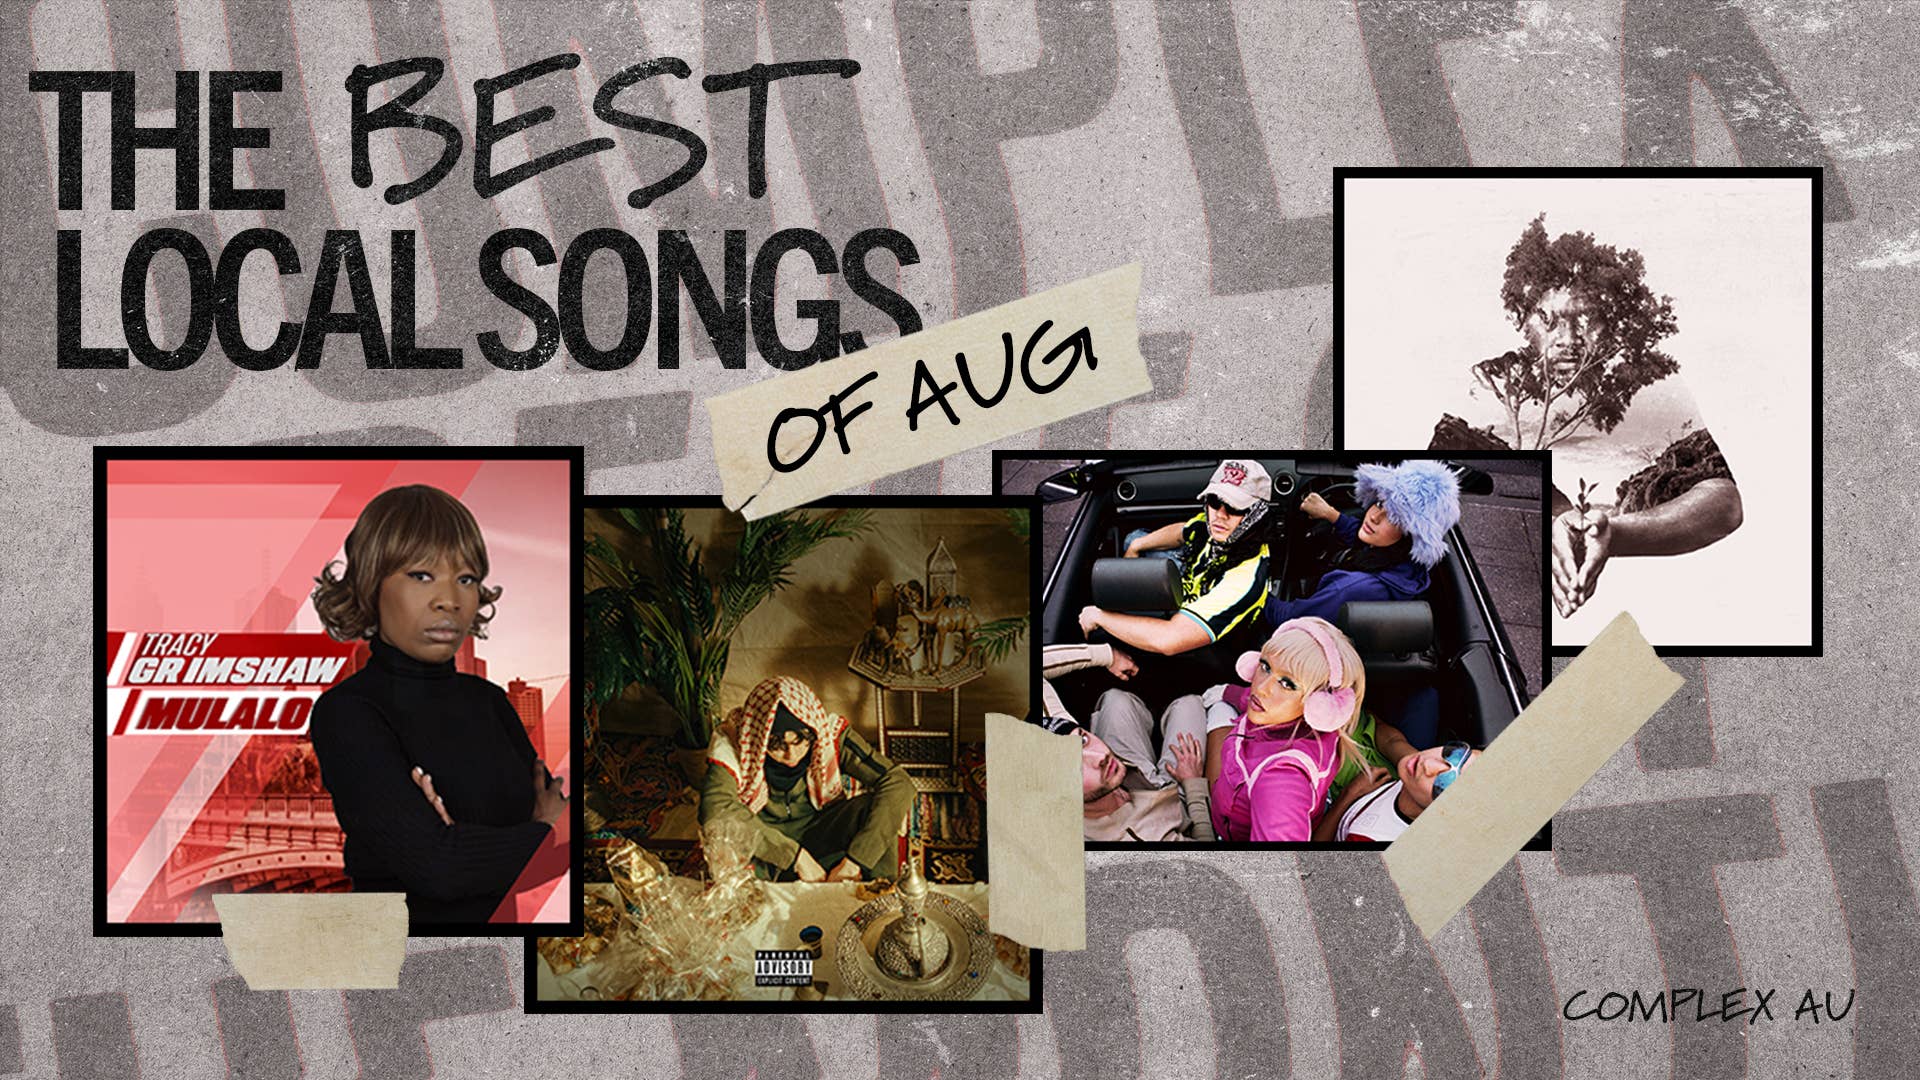 Single covers against a grey background that reads "best local songs of august"